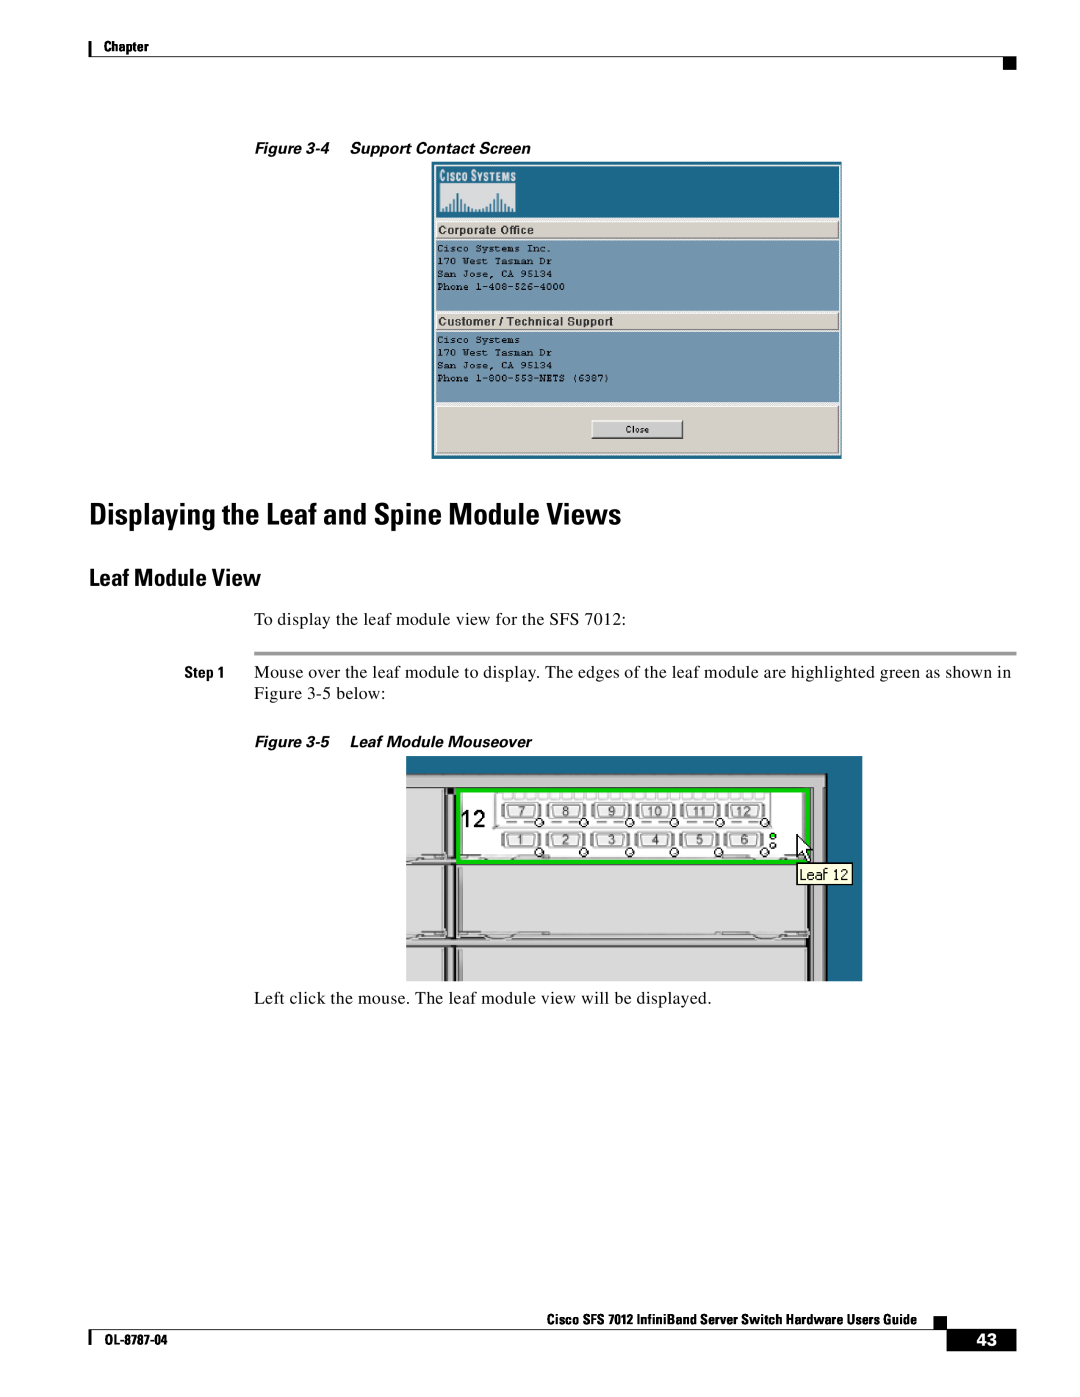 Cisco Systems SFS 7012 manual Displaying the Leaf and Spine Module Views, Leaf Module View 